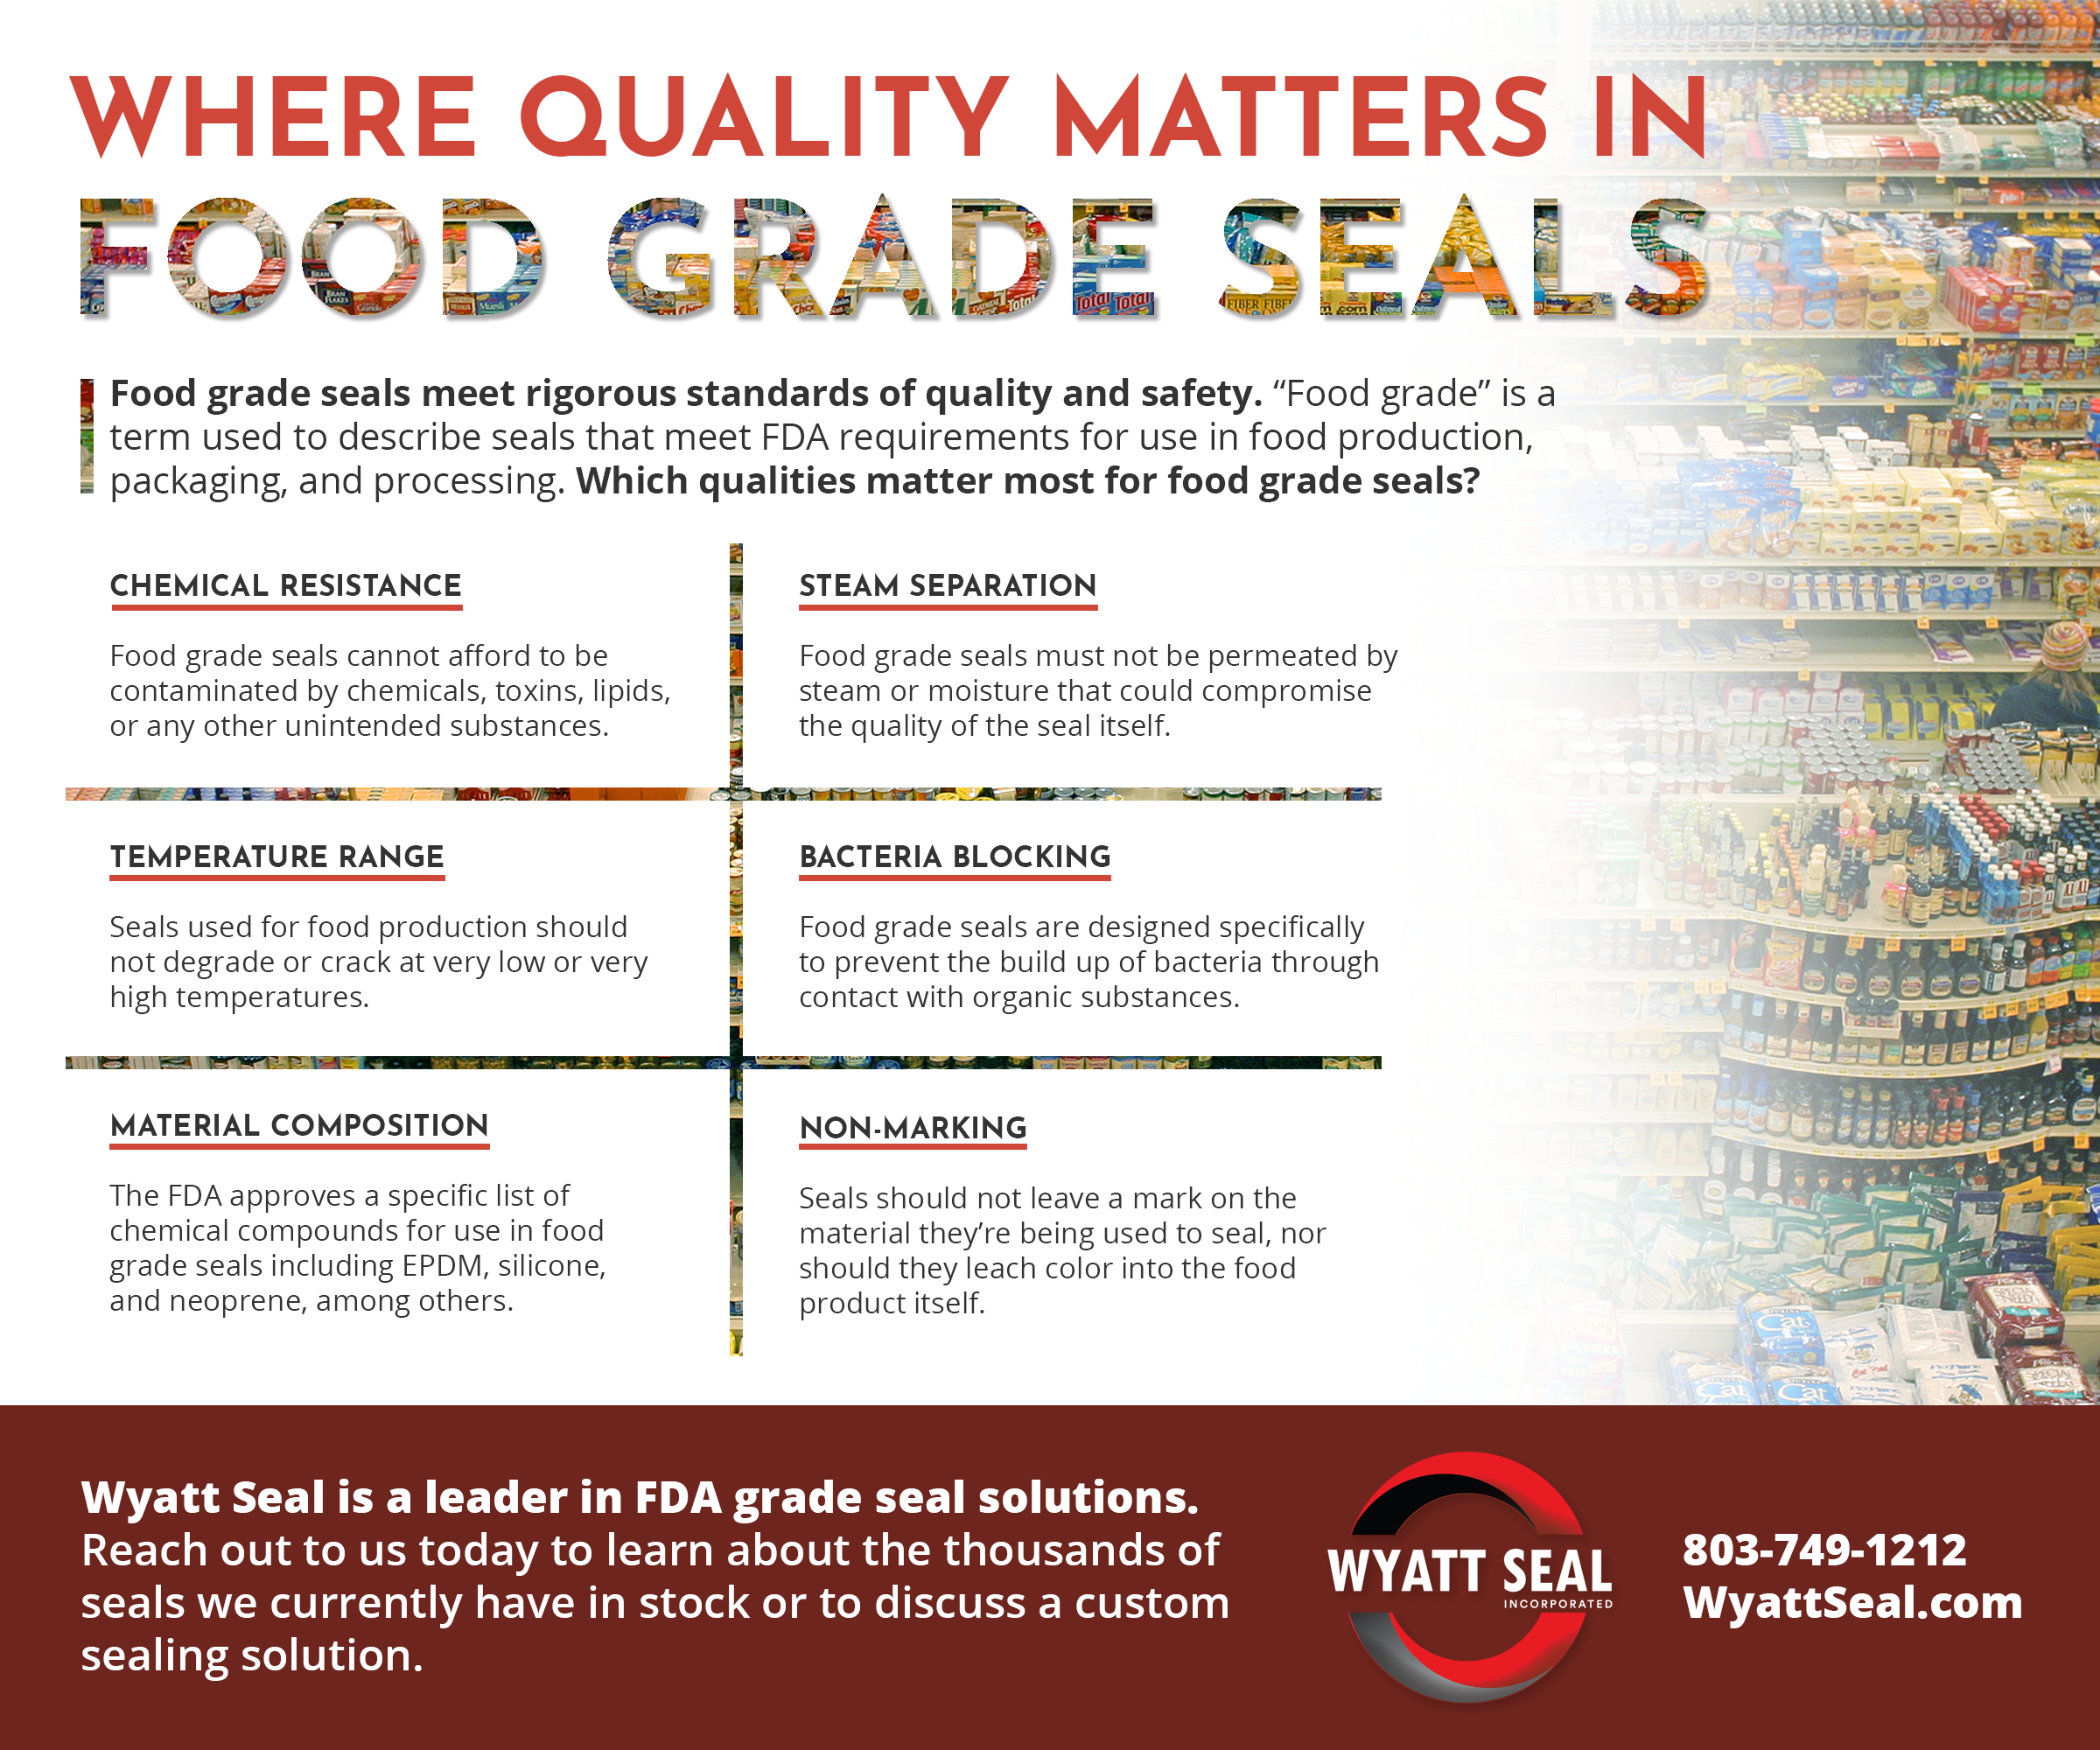 (Wyatt Seal) Where Quality Matters in Food Grade Seals Q2 2018 Infographic APPROVED.png